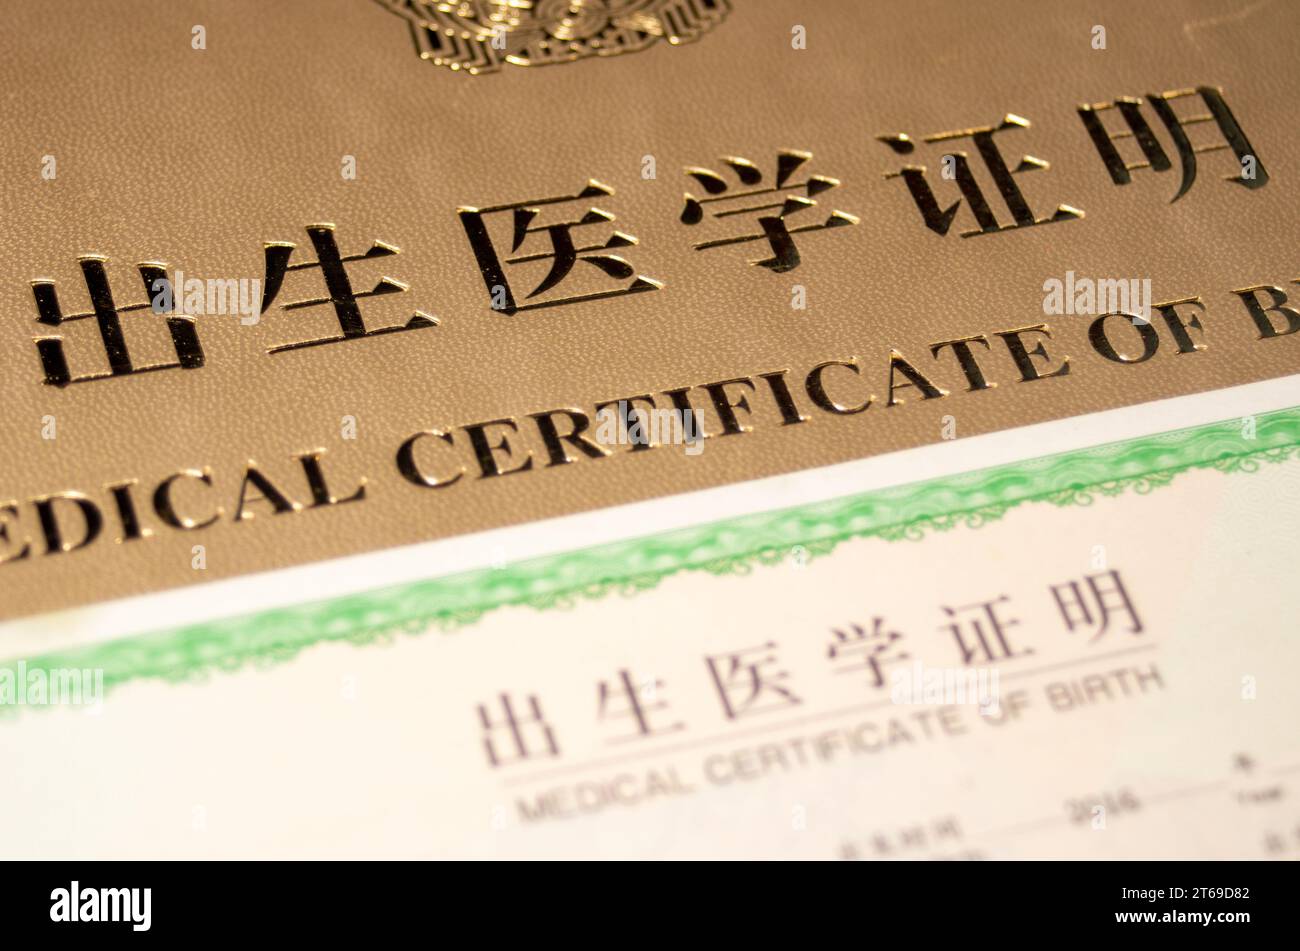 Chinese Medical Certificate of Birth,Birth Certificate in China Stock Photo